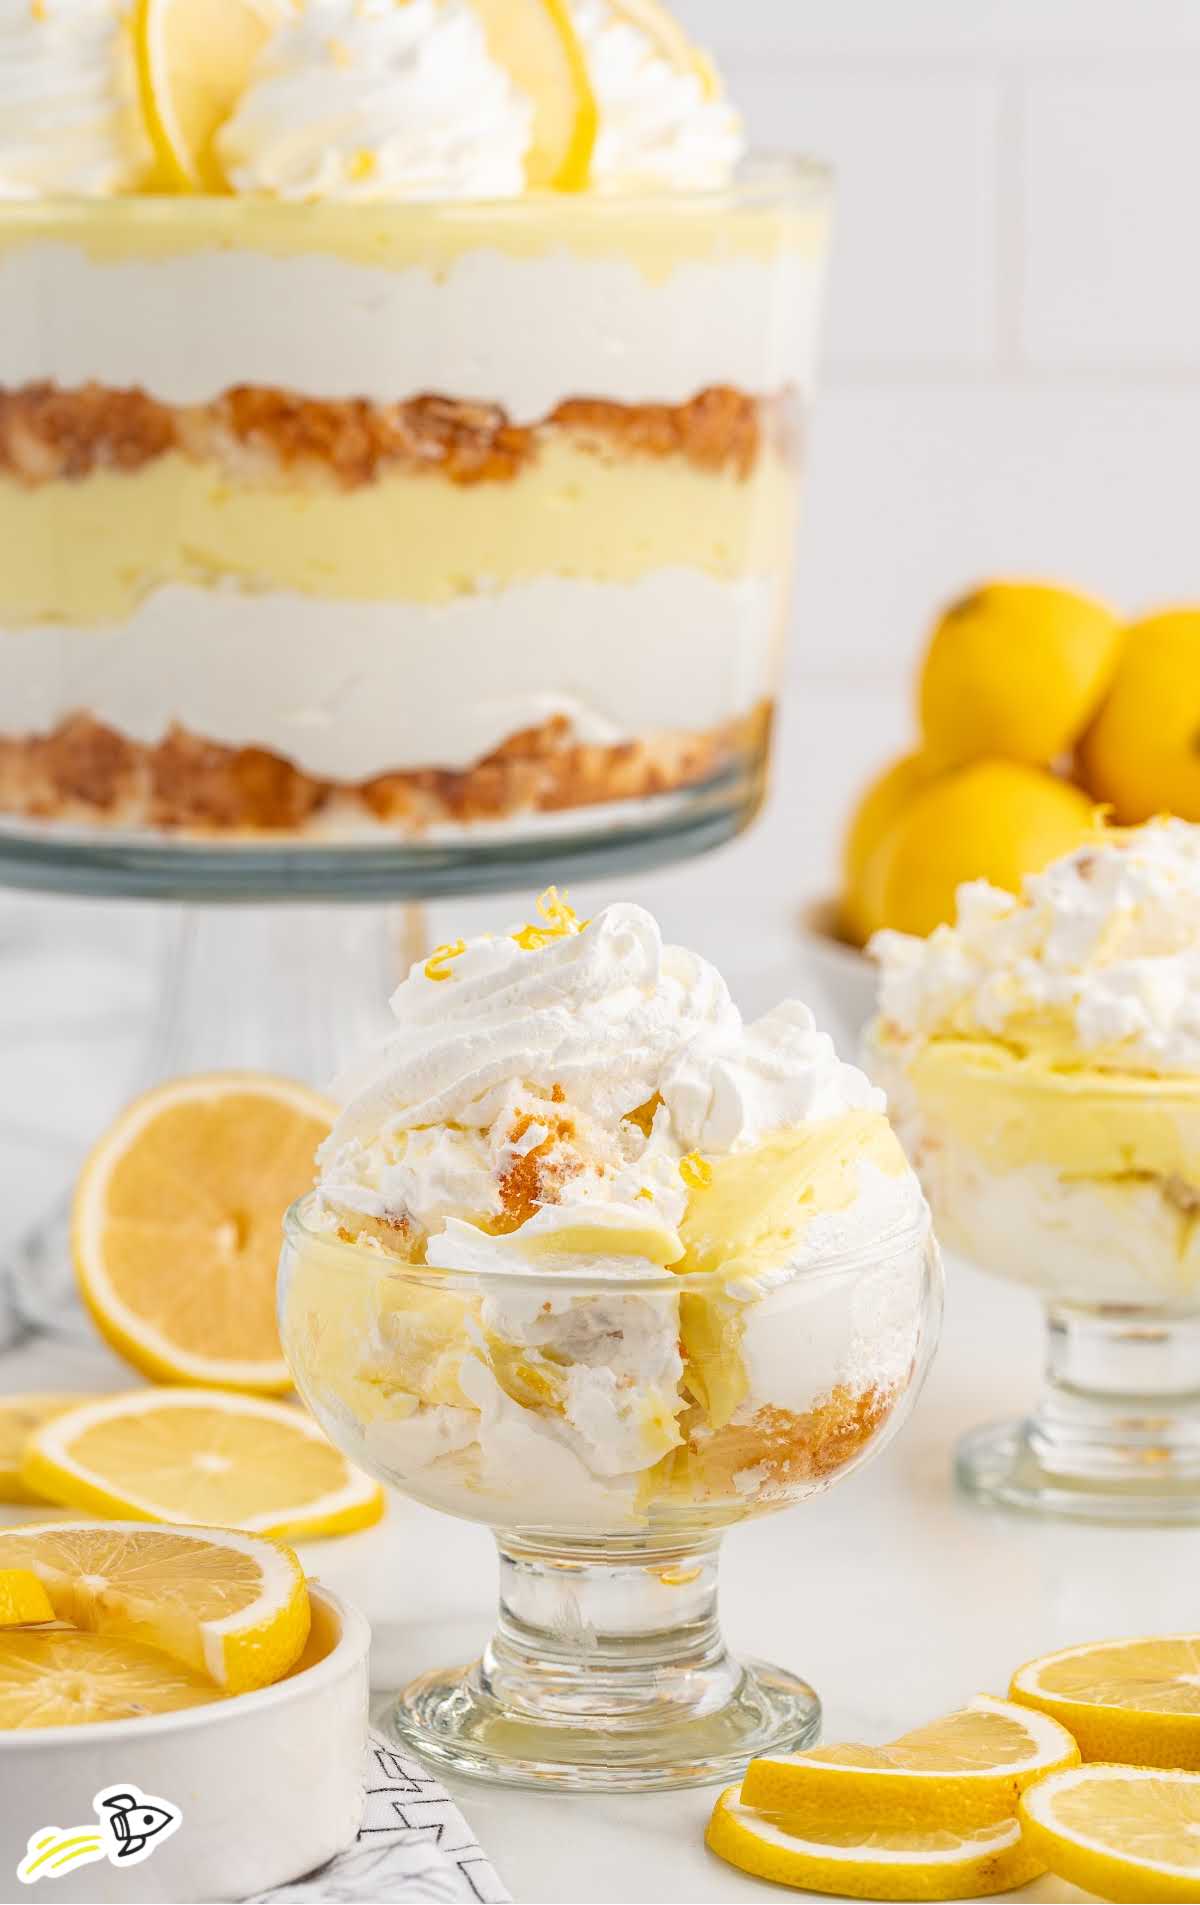 a jar of Lemon Trifle topped with whipped topping and slices of lemon